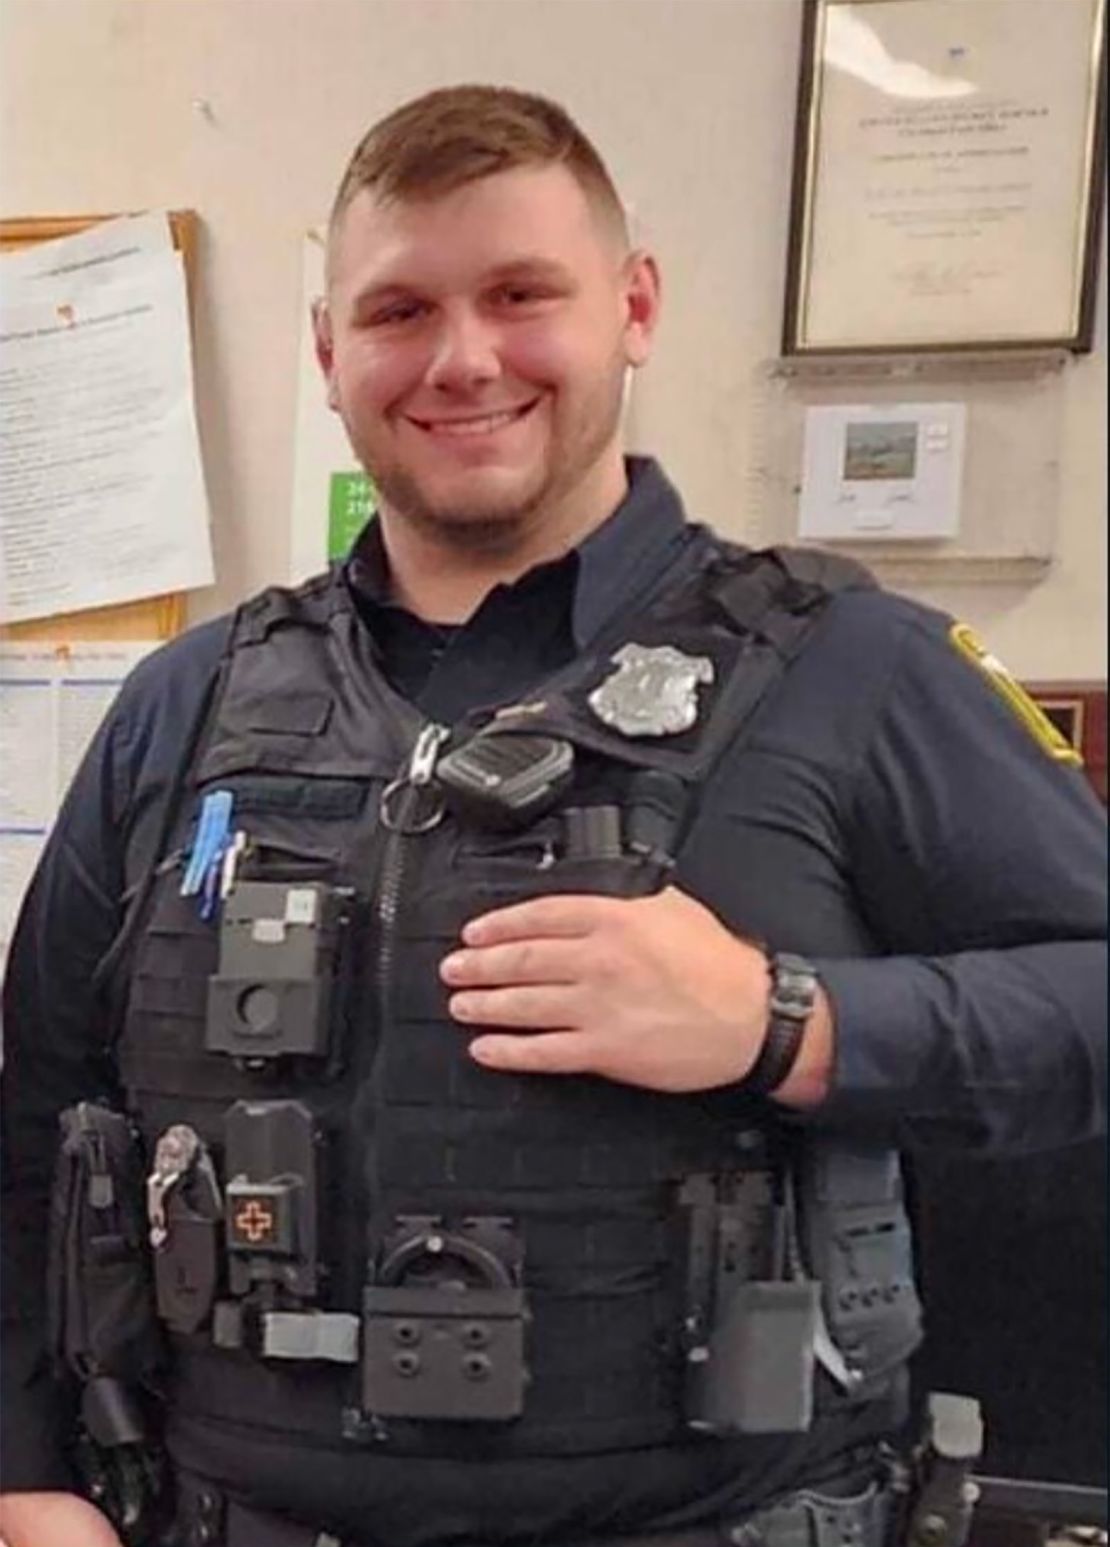 The Euclid Police Department identified Jacob Derbin, 23, as the officer that was shot and killed during an ambush on Saturday night.